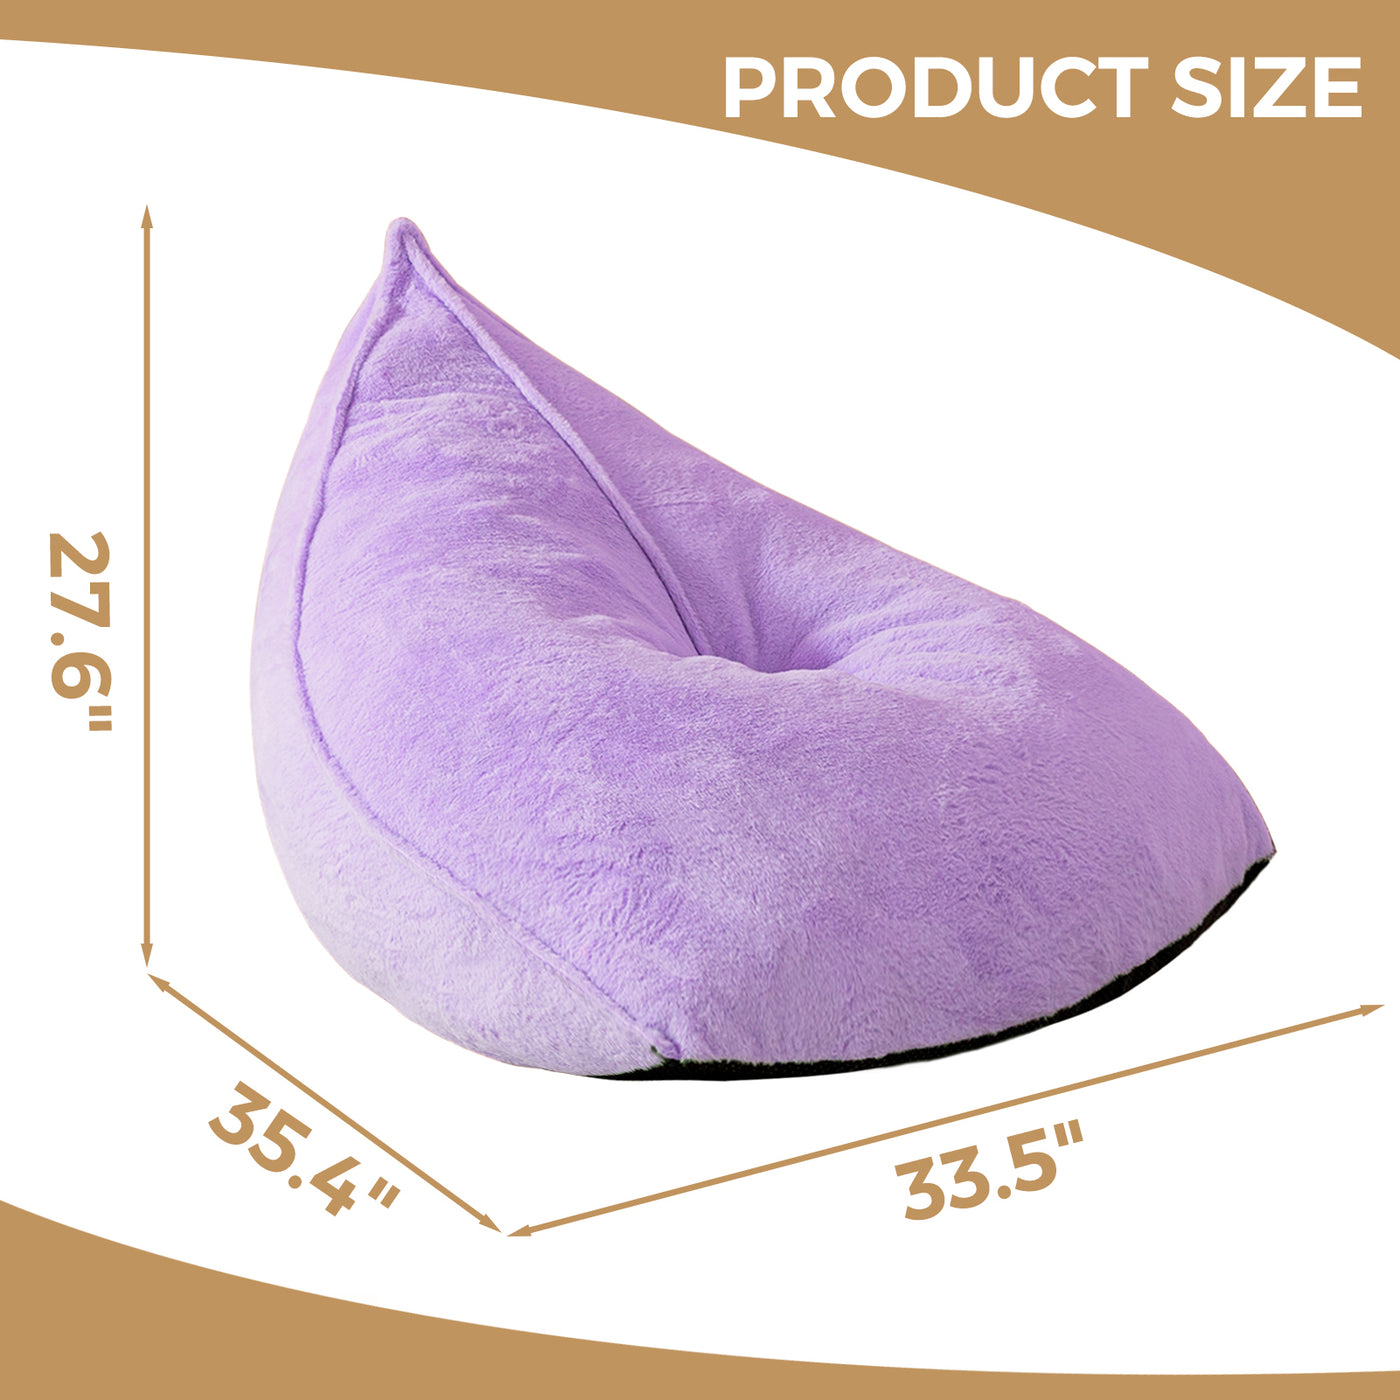 MAXYOYO Bean Bag Chairs for Adults, Giant Faux Fur Lazy Couch with Filler, Purple